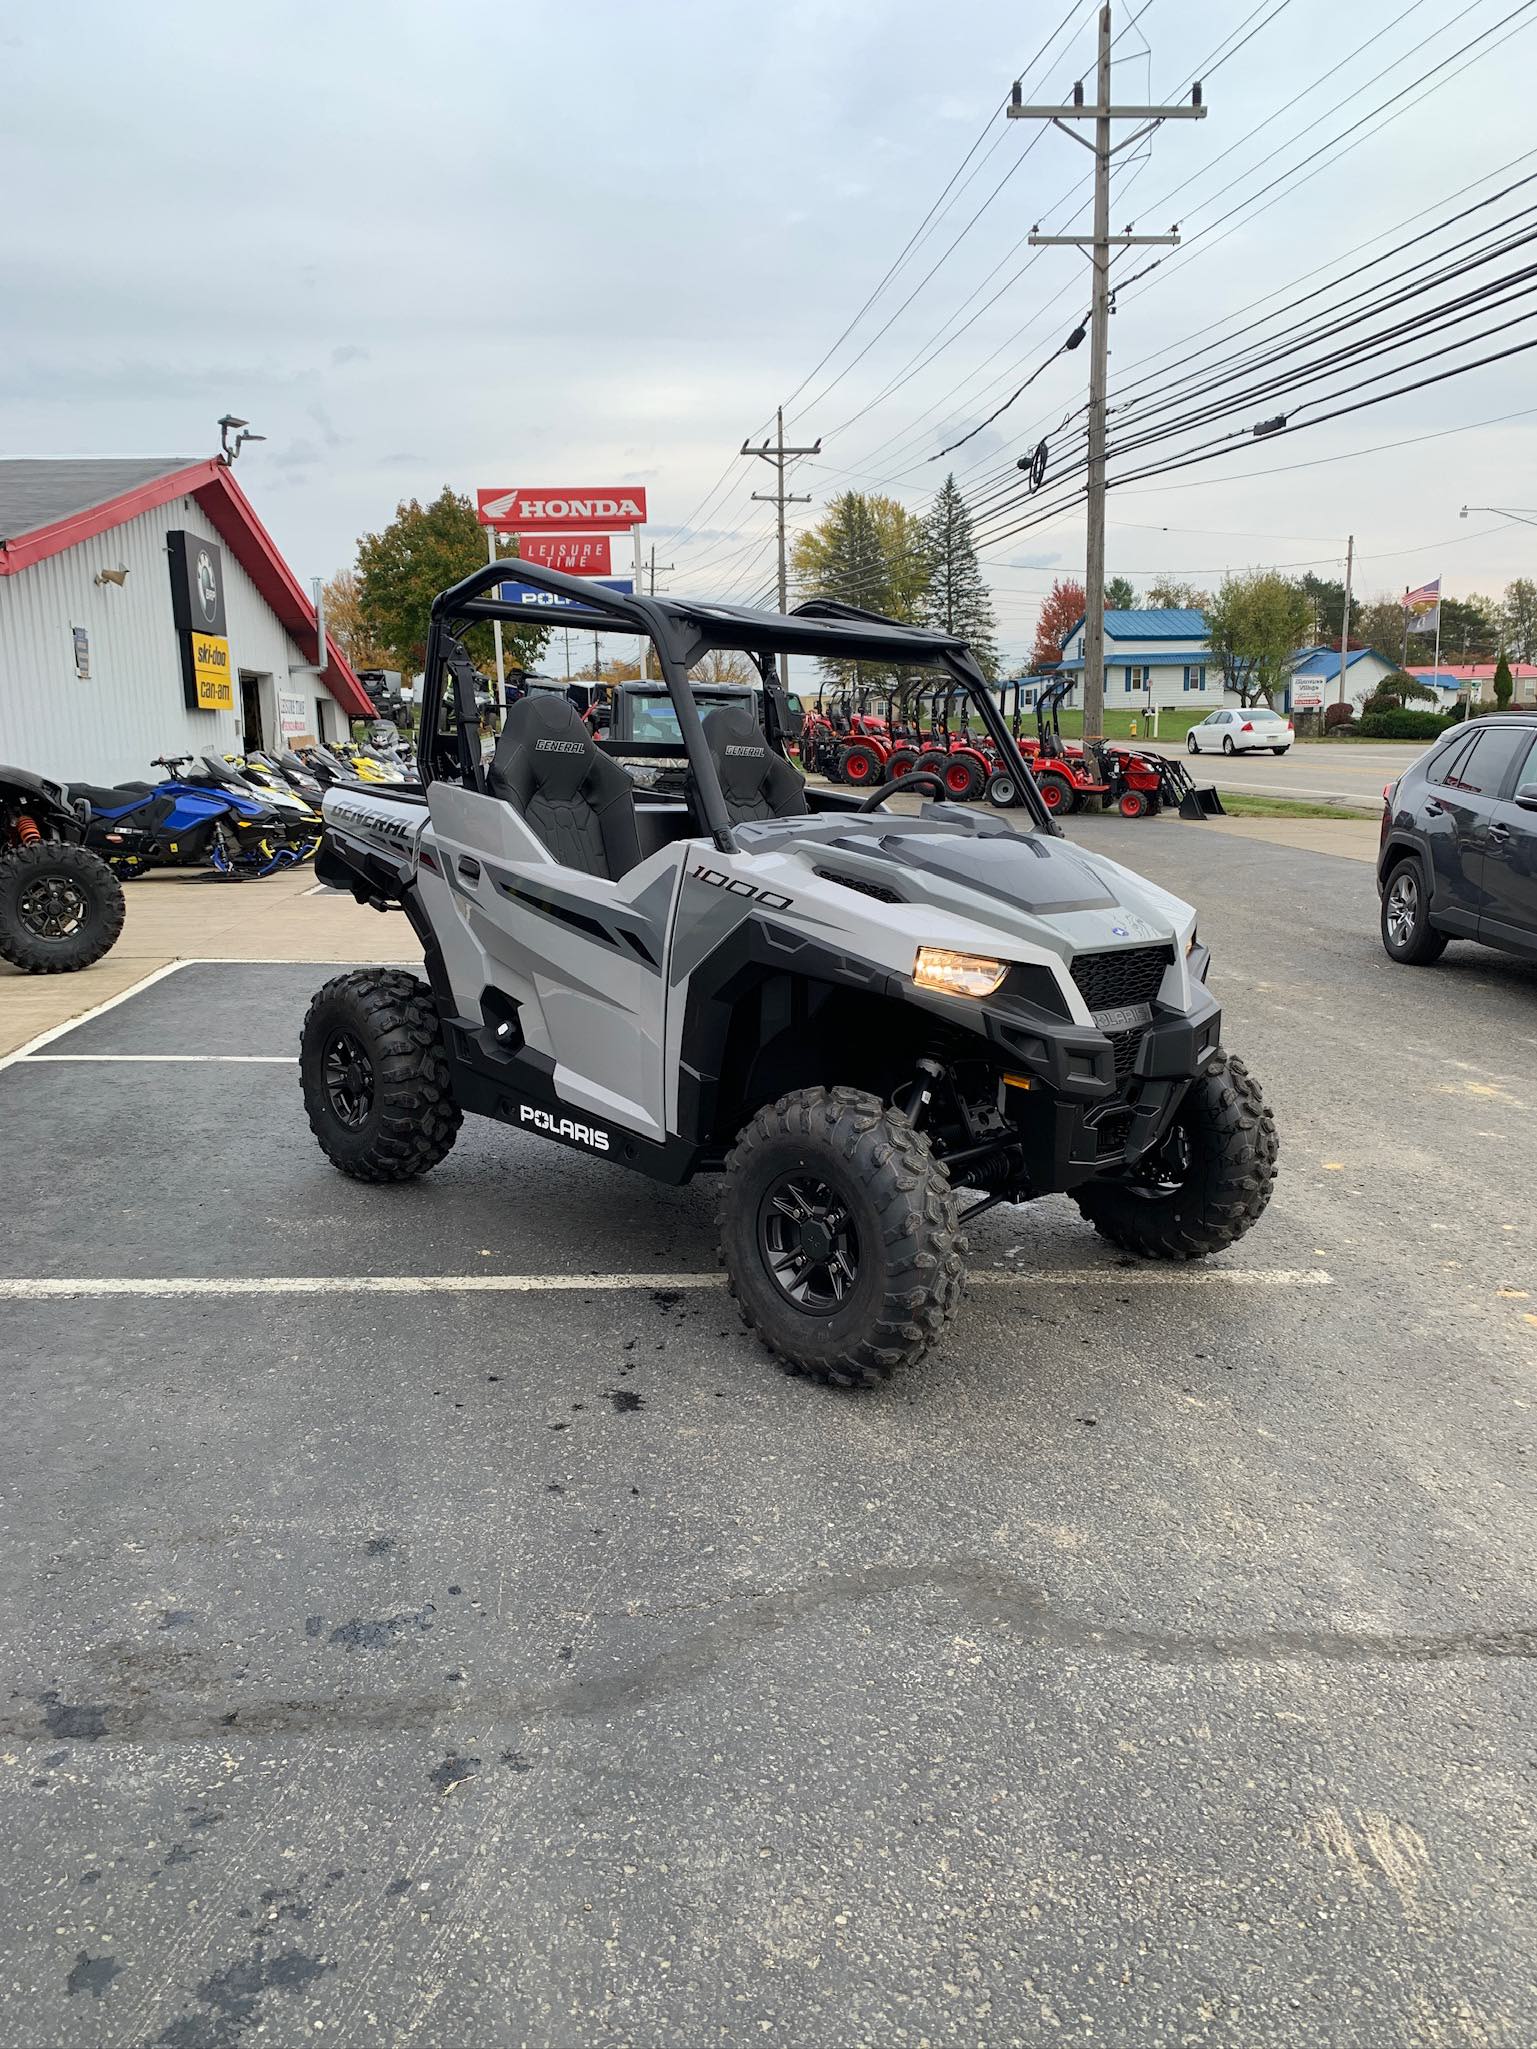 2024 Polaris GENERAL 1000 Sport at Leisure Time Powersports of Corry